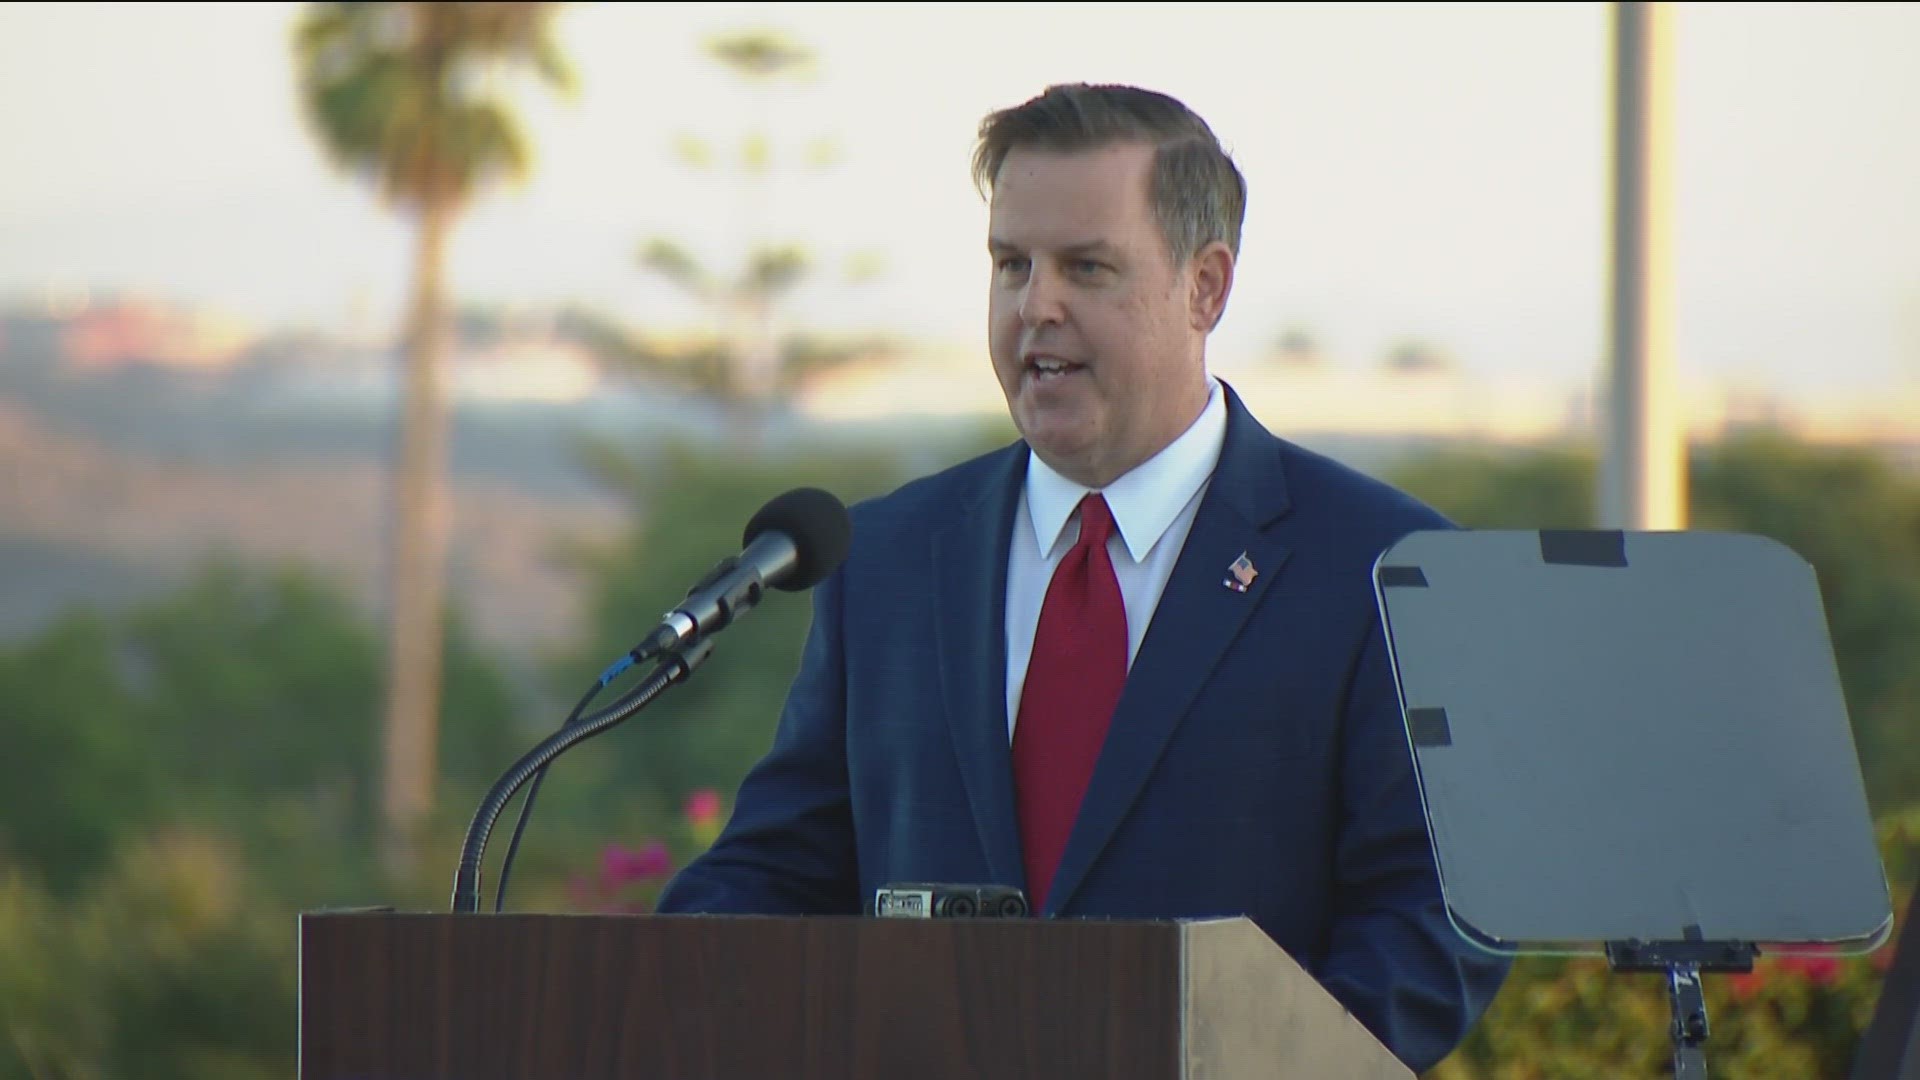 The Mayor of Chula Vista delivered his annual State of the City speech, highlighting what's been accomplished so far and what needs to be addressed.